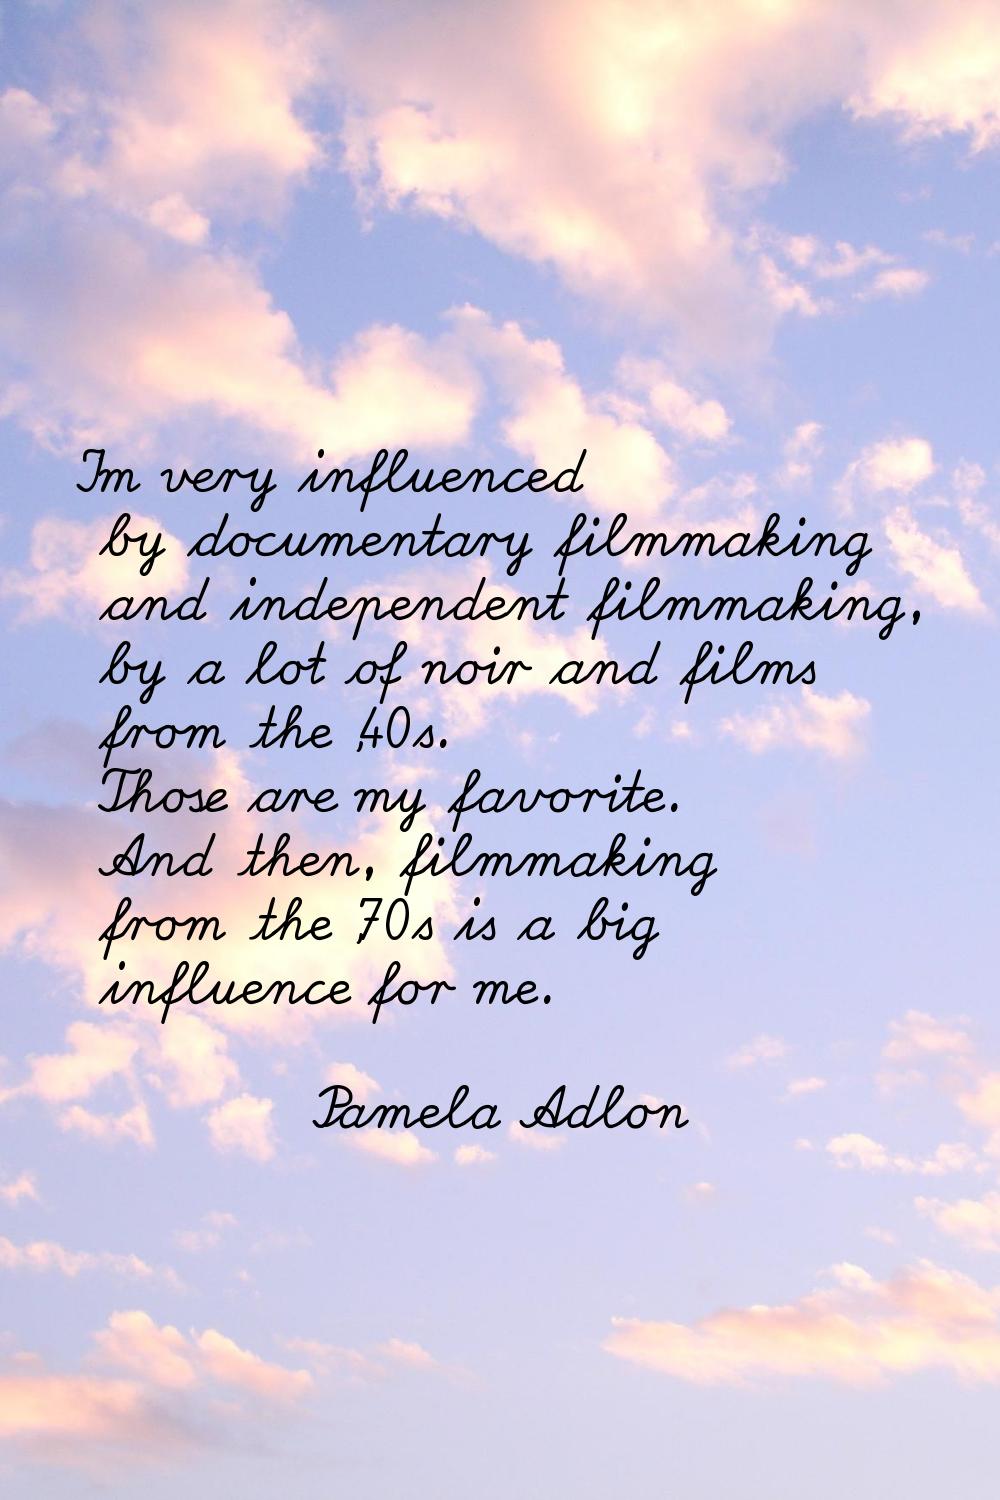 I'm very influenced by documentary filmmaking and independent filmmaking, by a lot of noir and film